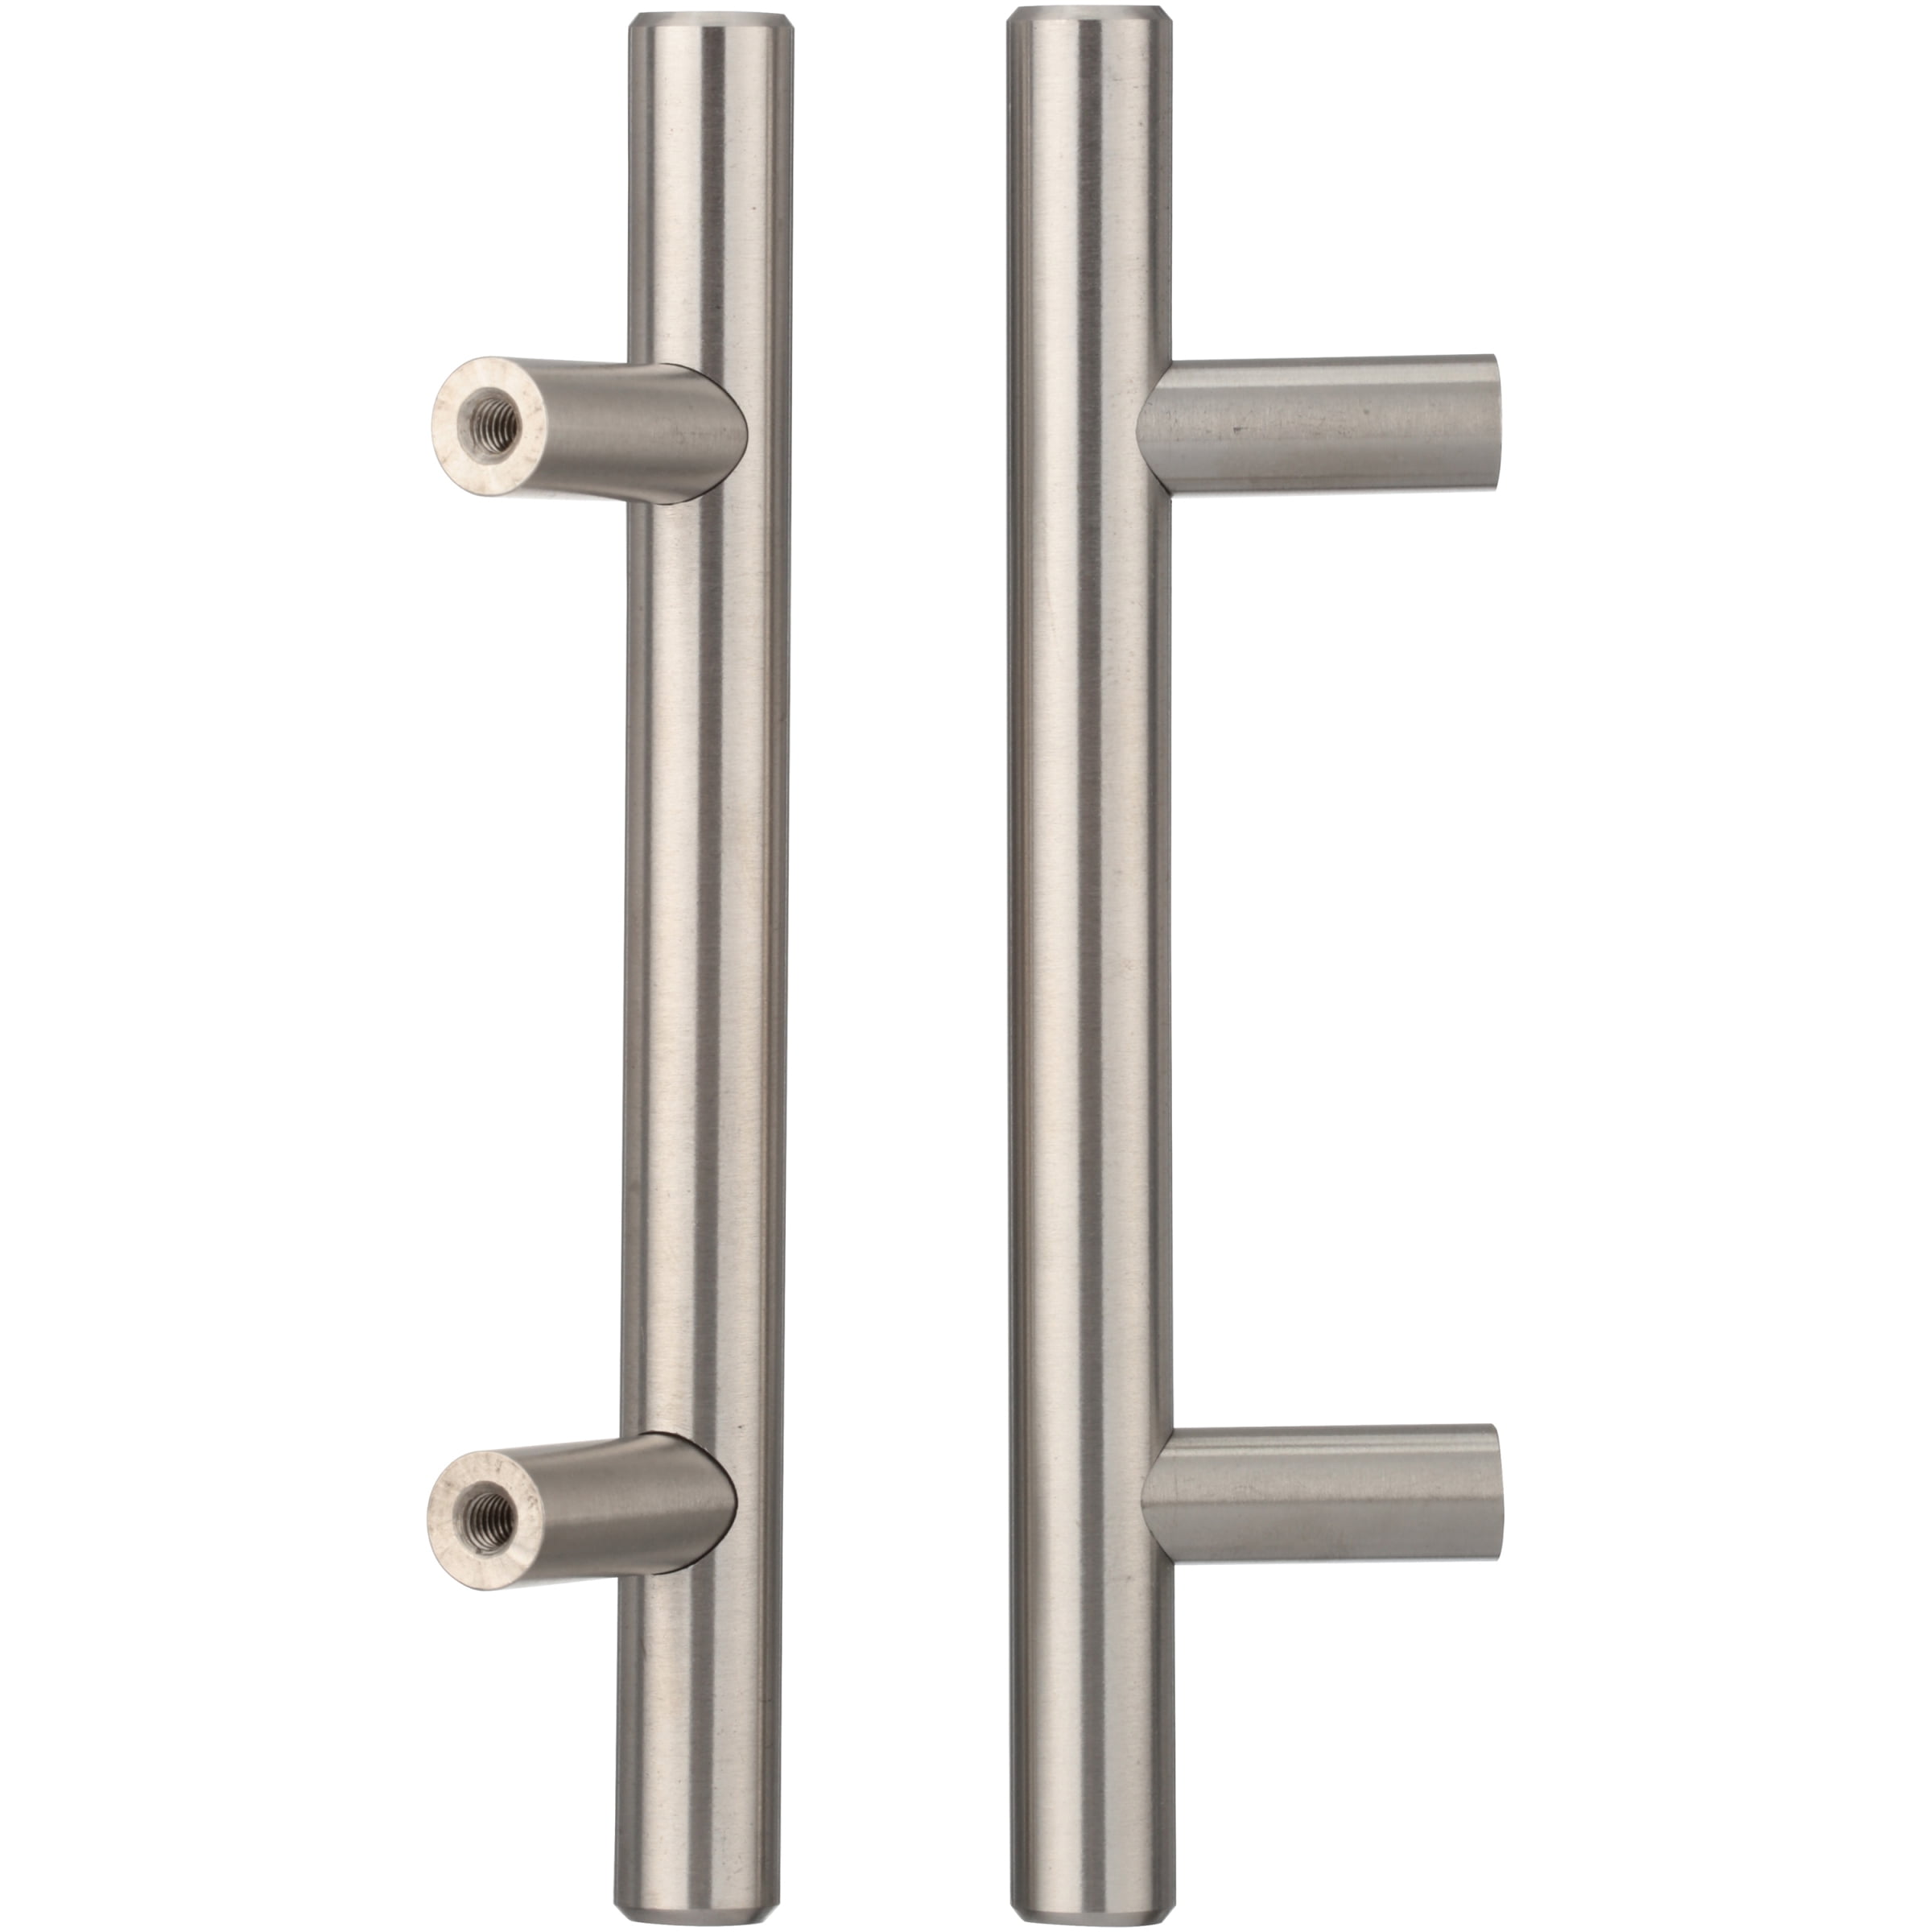 Set Stainless Steel Cabinet Drawer Box Door Hinges for Wooden Furniture Hardware Hardware Color : Brass, Size : 2 inch 2 